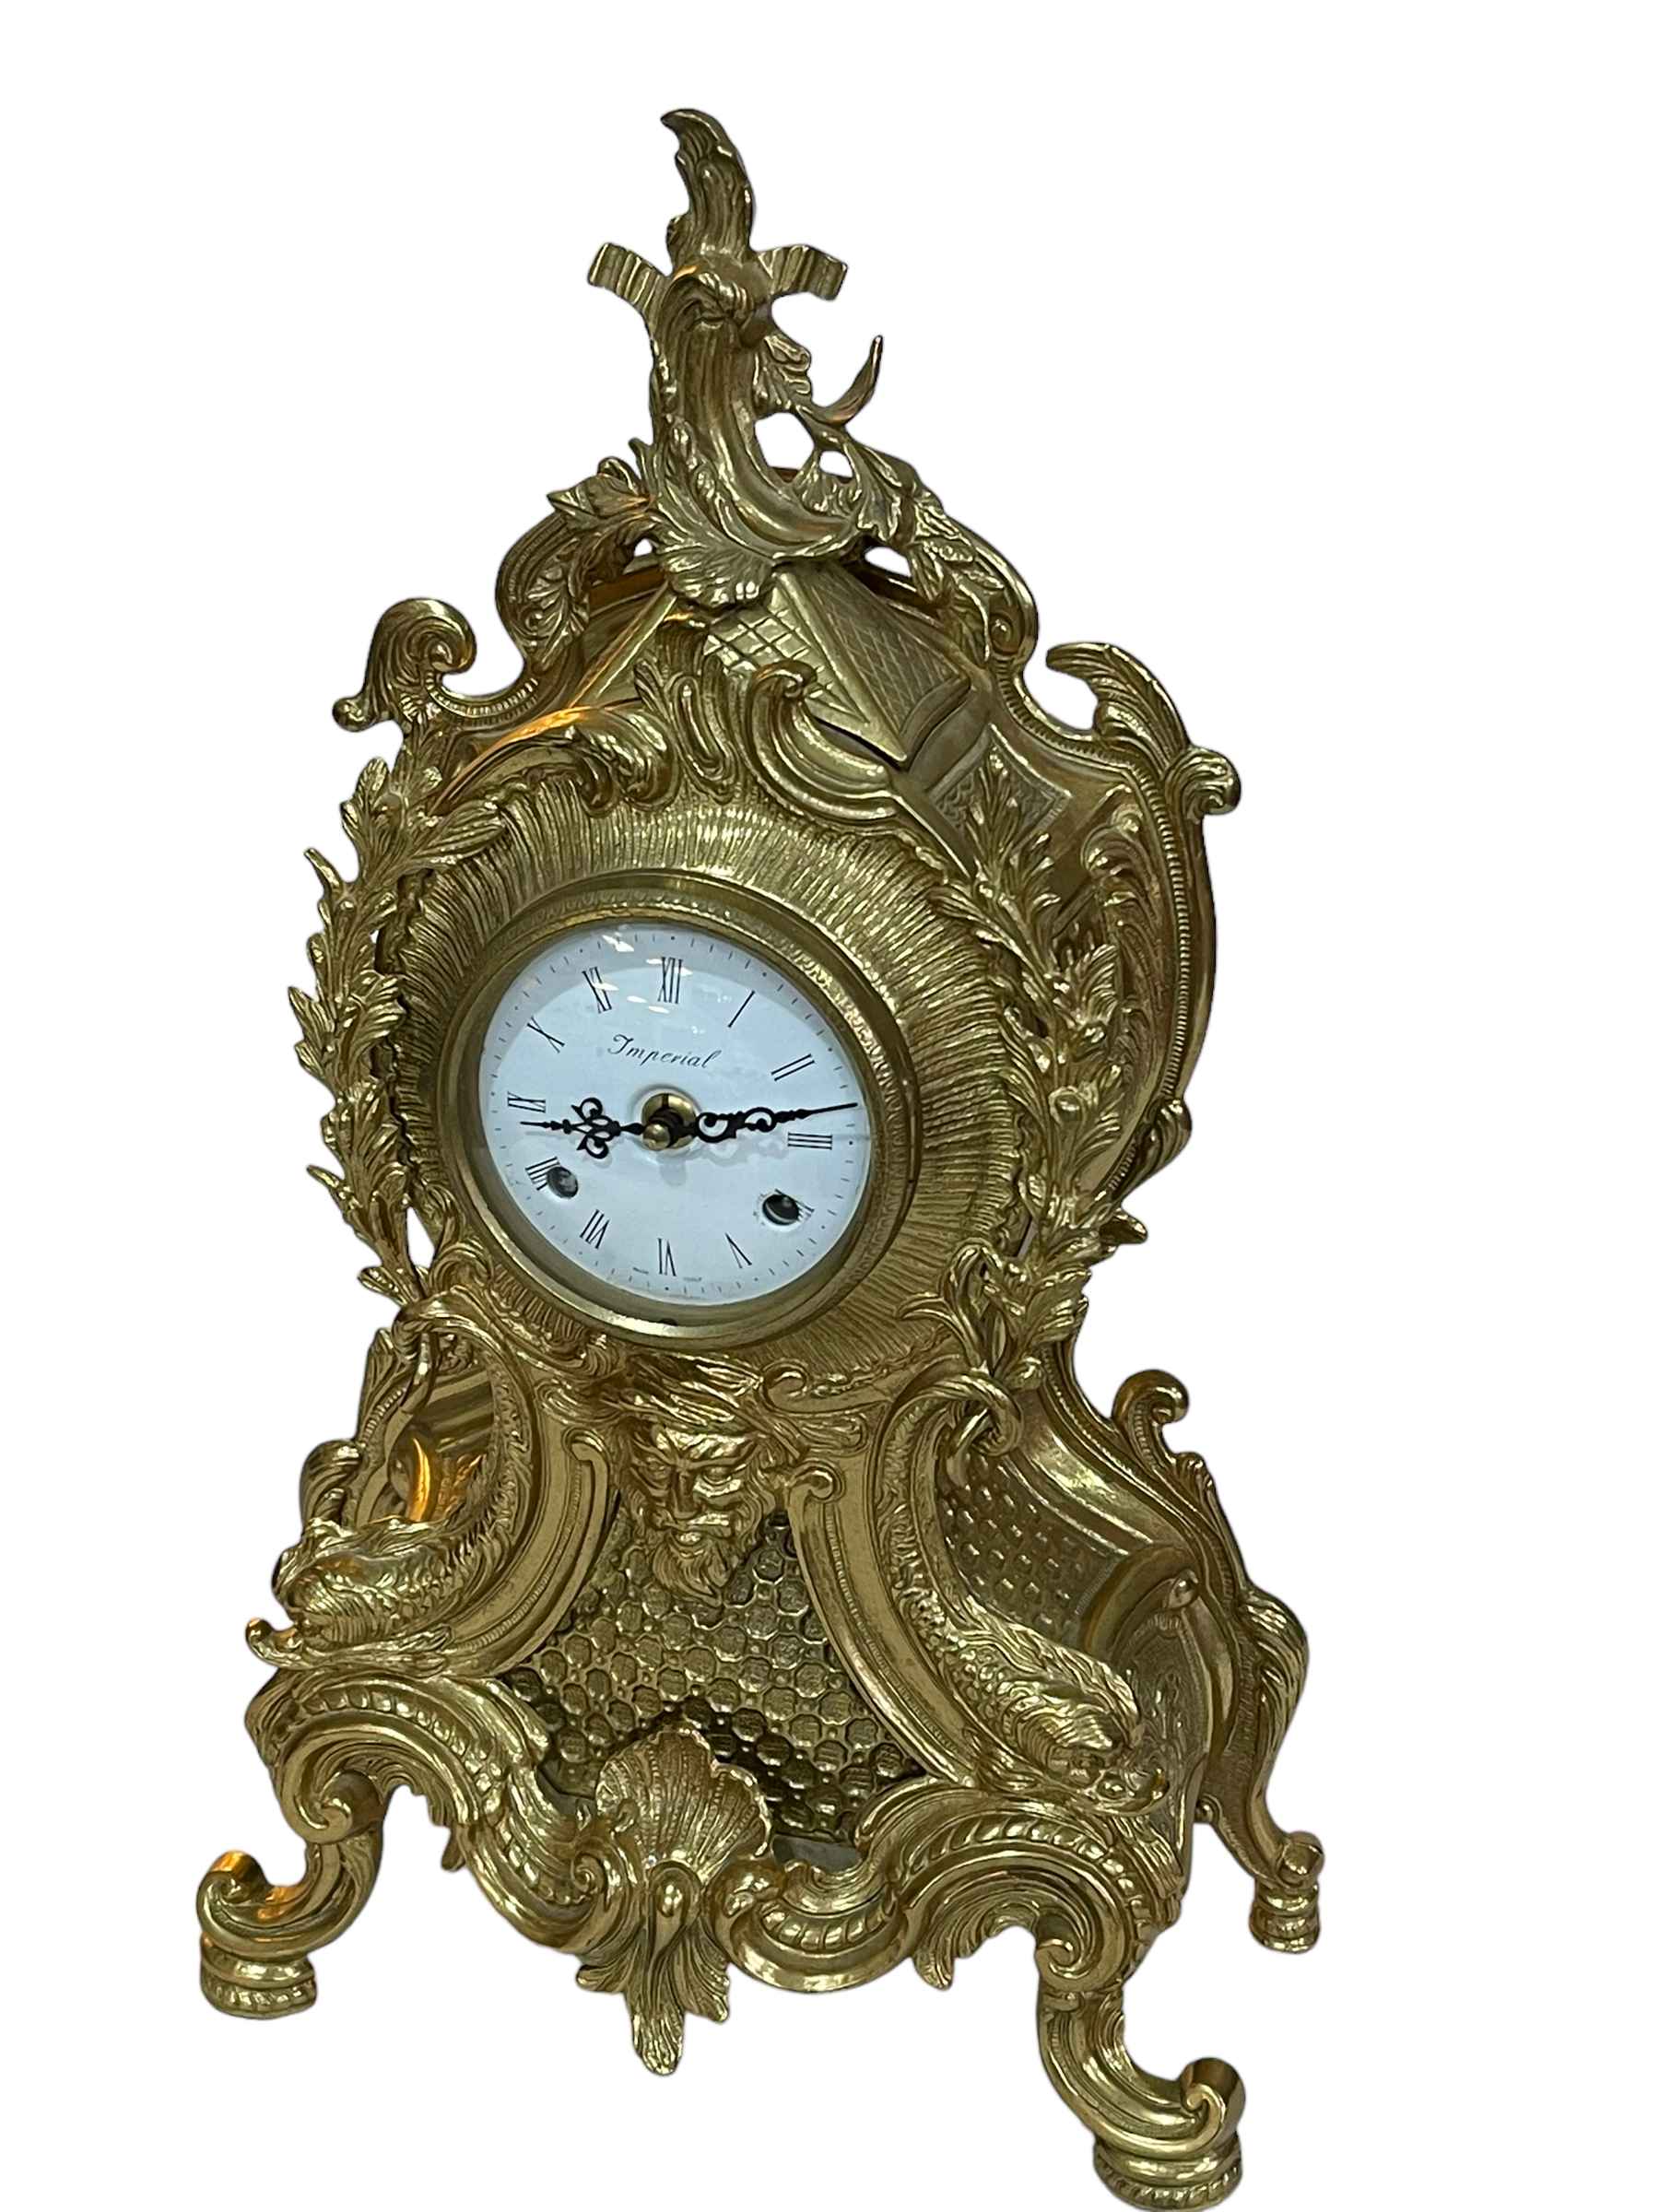 Ornate brass mantel clock with white dial, 48cm.